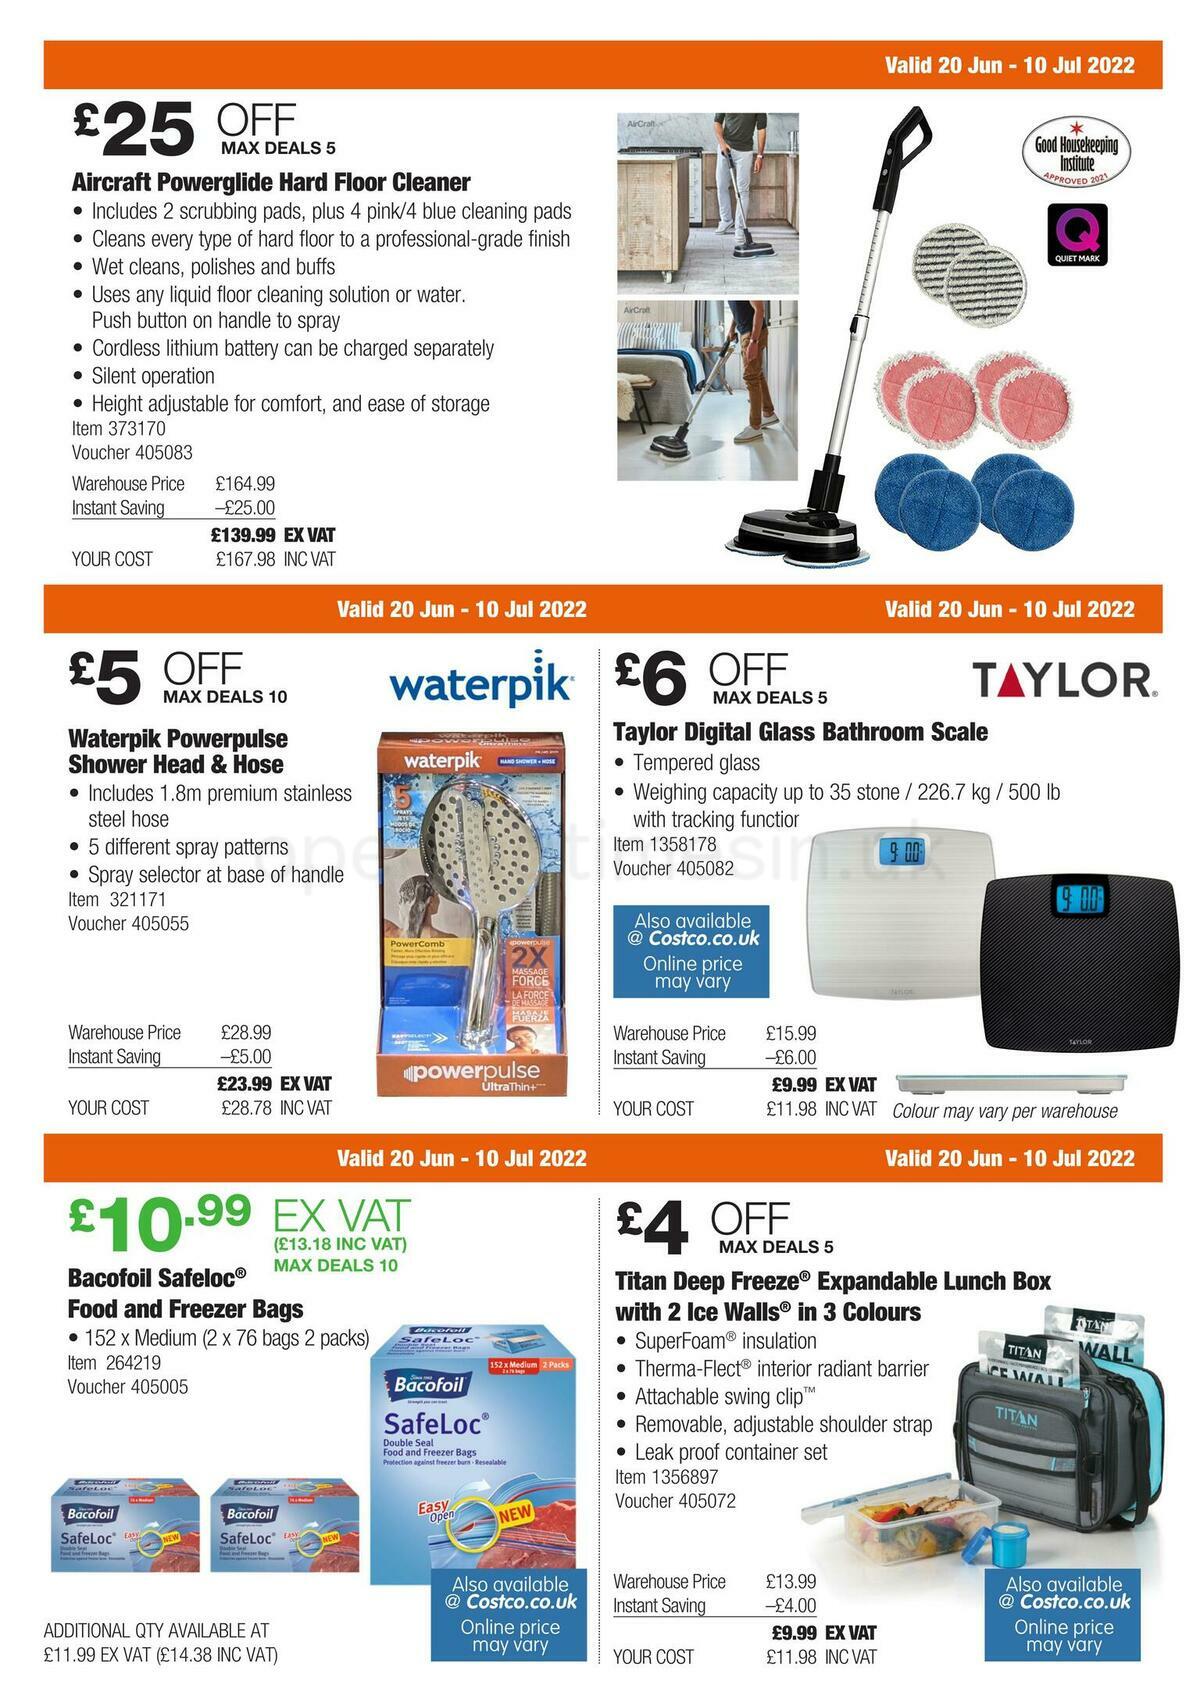 Costco Scotland & Wales Offers from 20 June